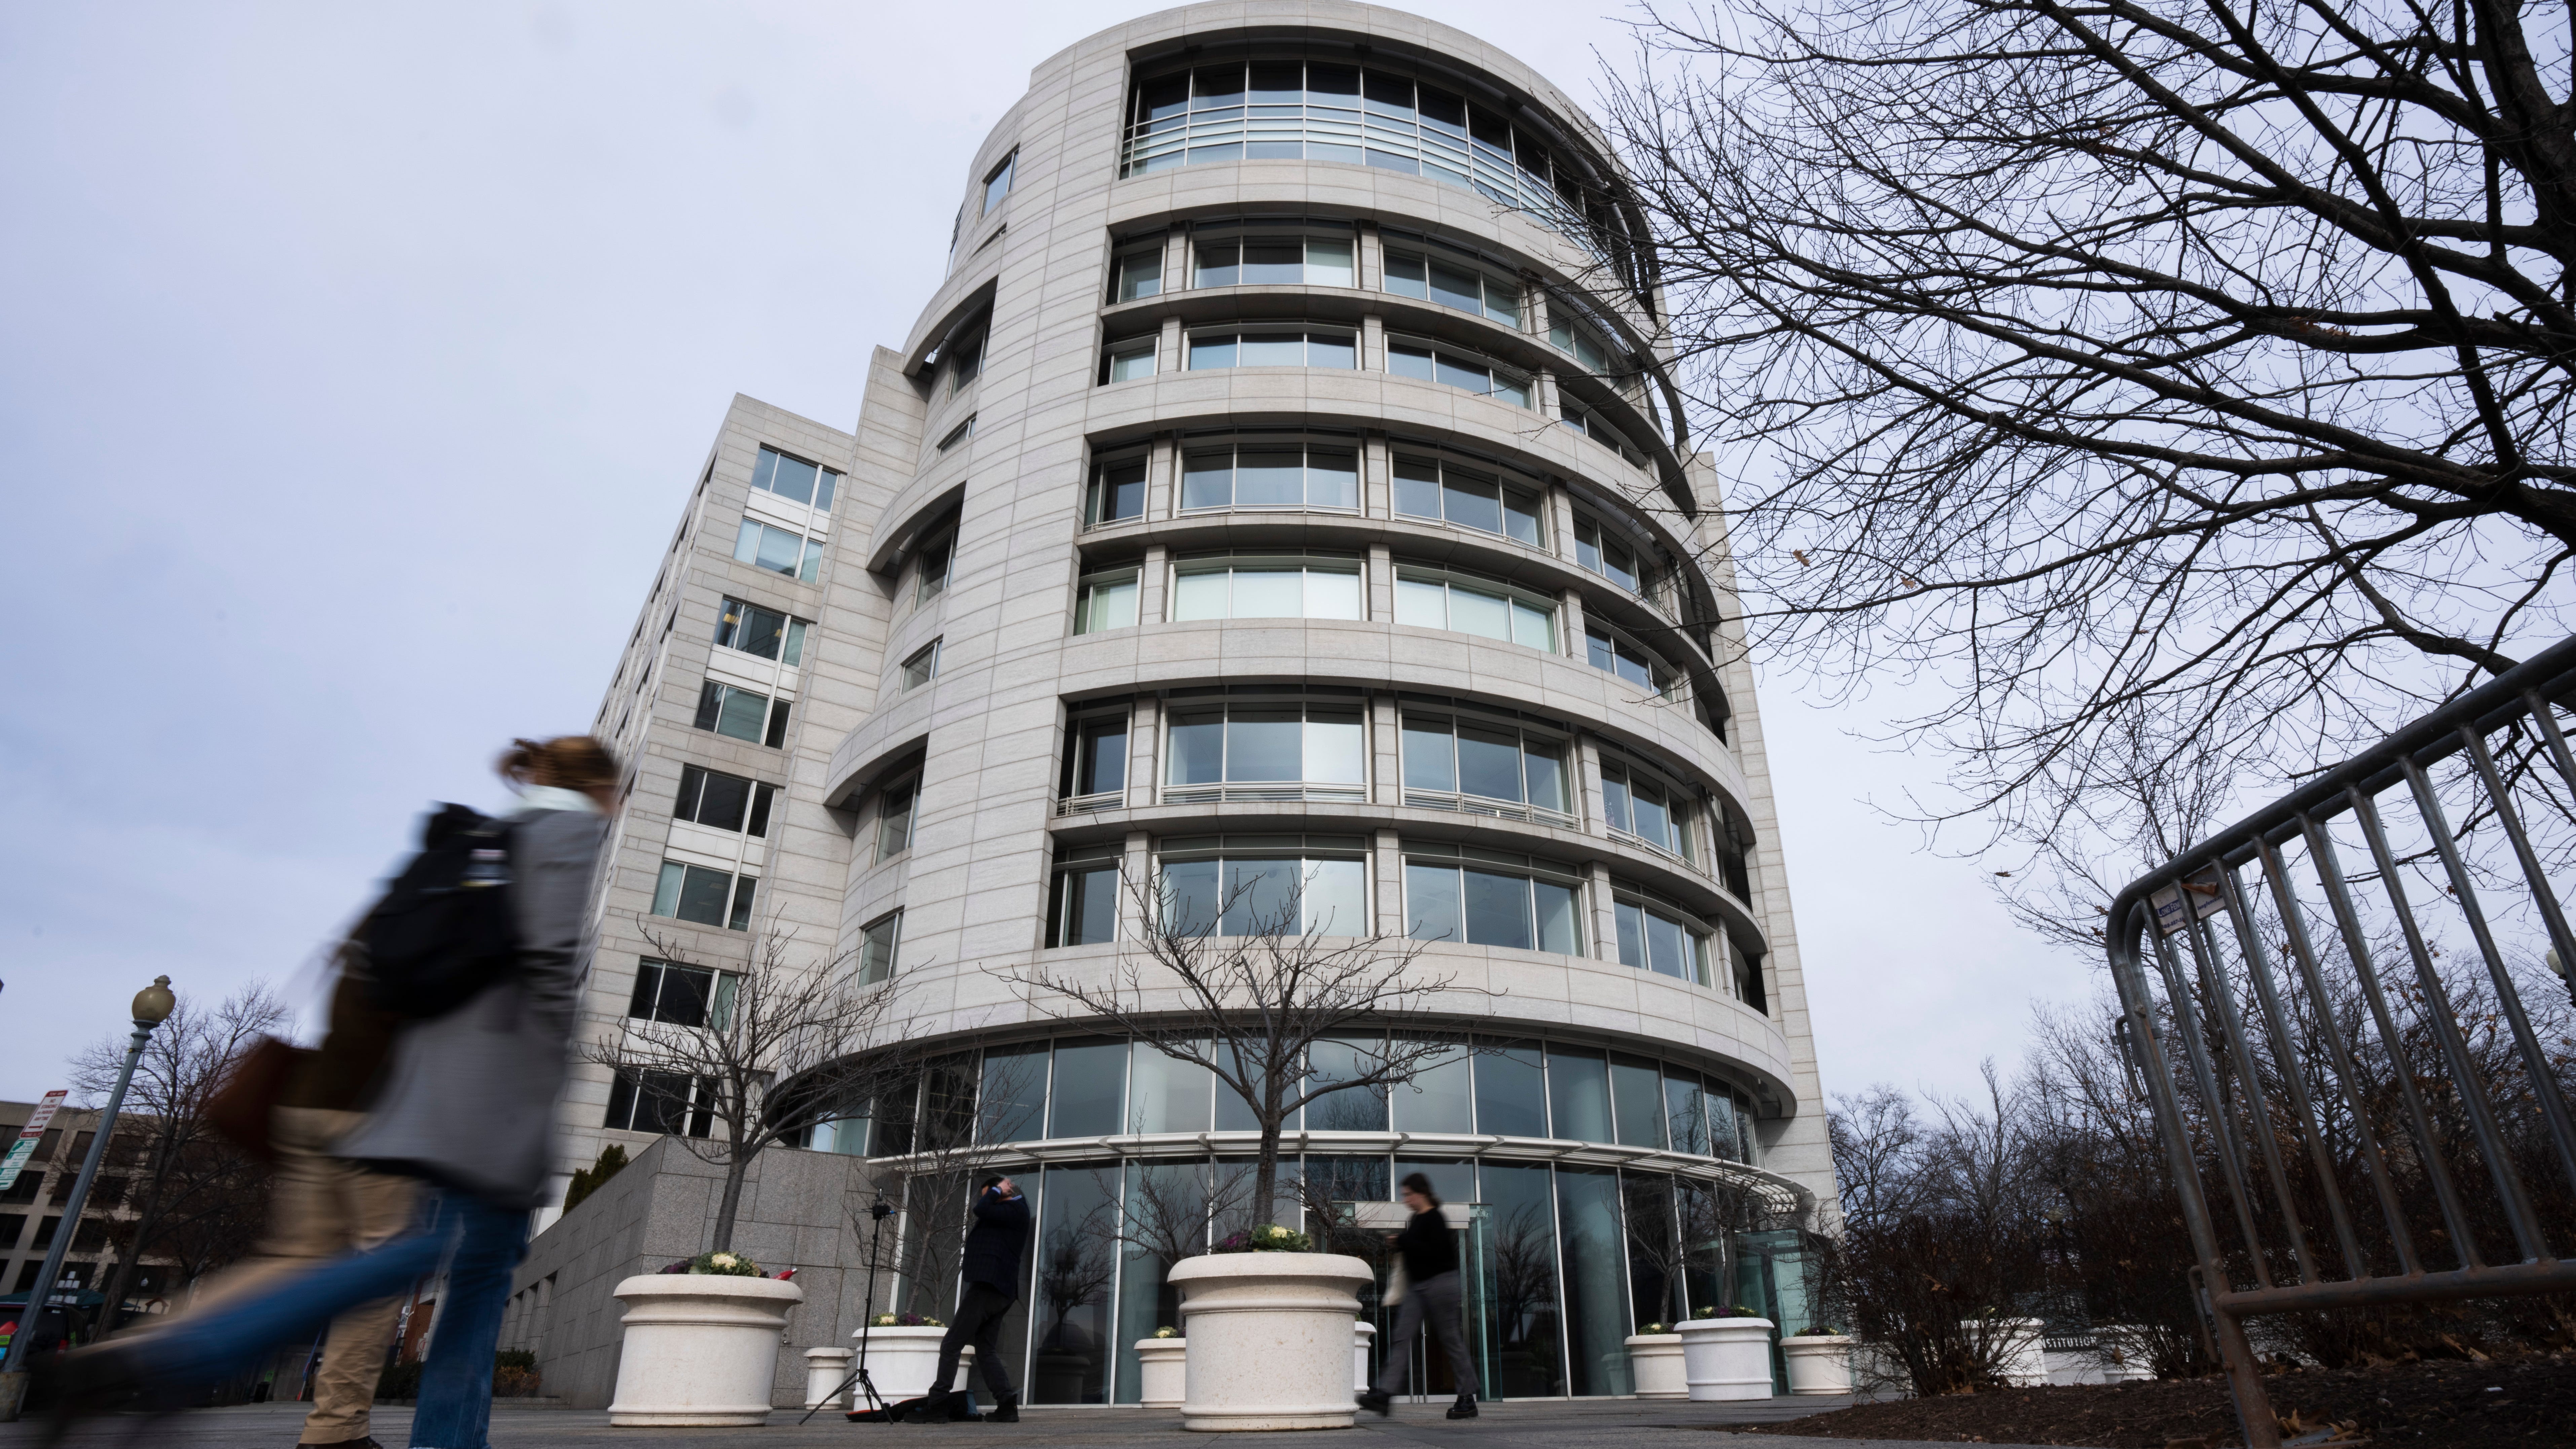 The building that housed office space of President Joe Biden's former institute, the Penn Biden Center, is seen at the corner of Constitution and Louisiana Avenue NW, in Washington, Tuesday, Jan. 10, 2023. Potentially classified documents were found on Nov. 2, 2022, in a 